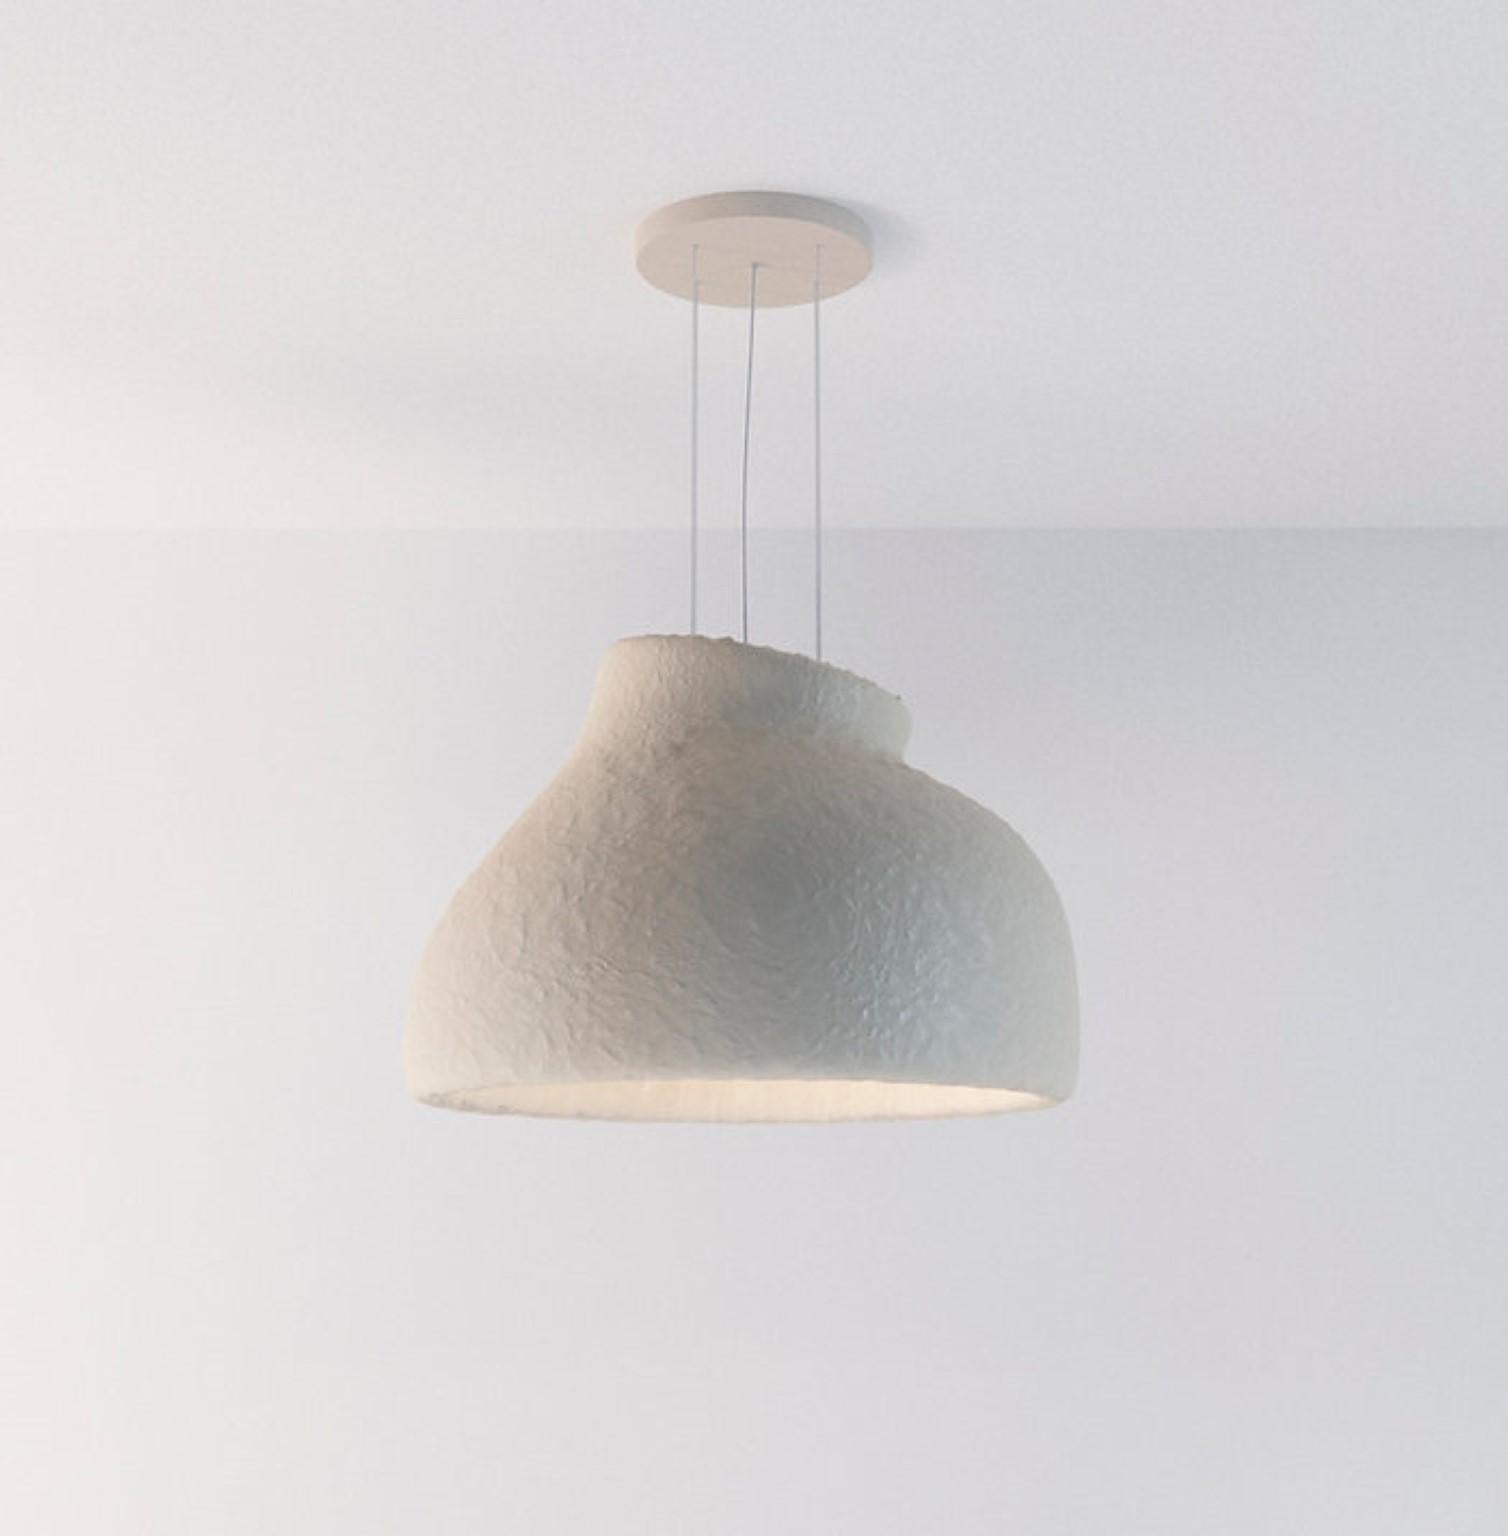 Big pendant lamp by Faina.
Design: Victoriya Yakusha.
Materials: a blend of upcycled steel, flax rubber, wood chips, cellulose, and clay all with biopolymer cover.
Dimensions: D 100 x H 72 cm.
Available in 12 colours..

Soniah tends toward the